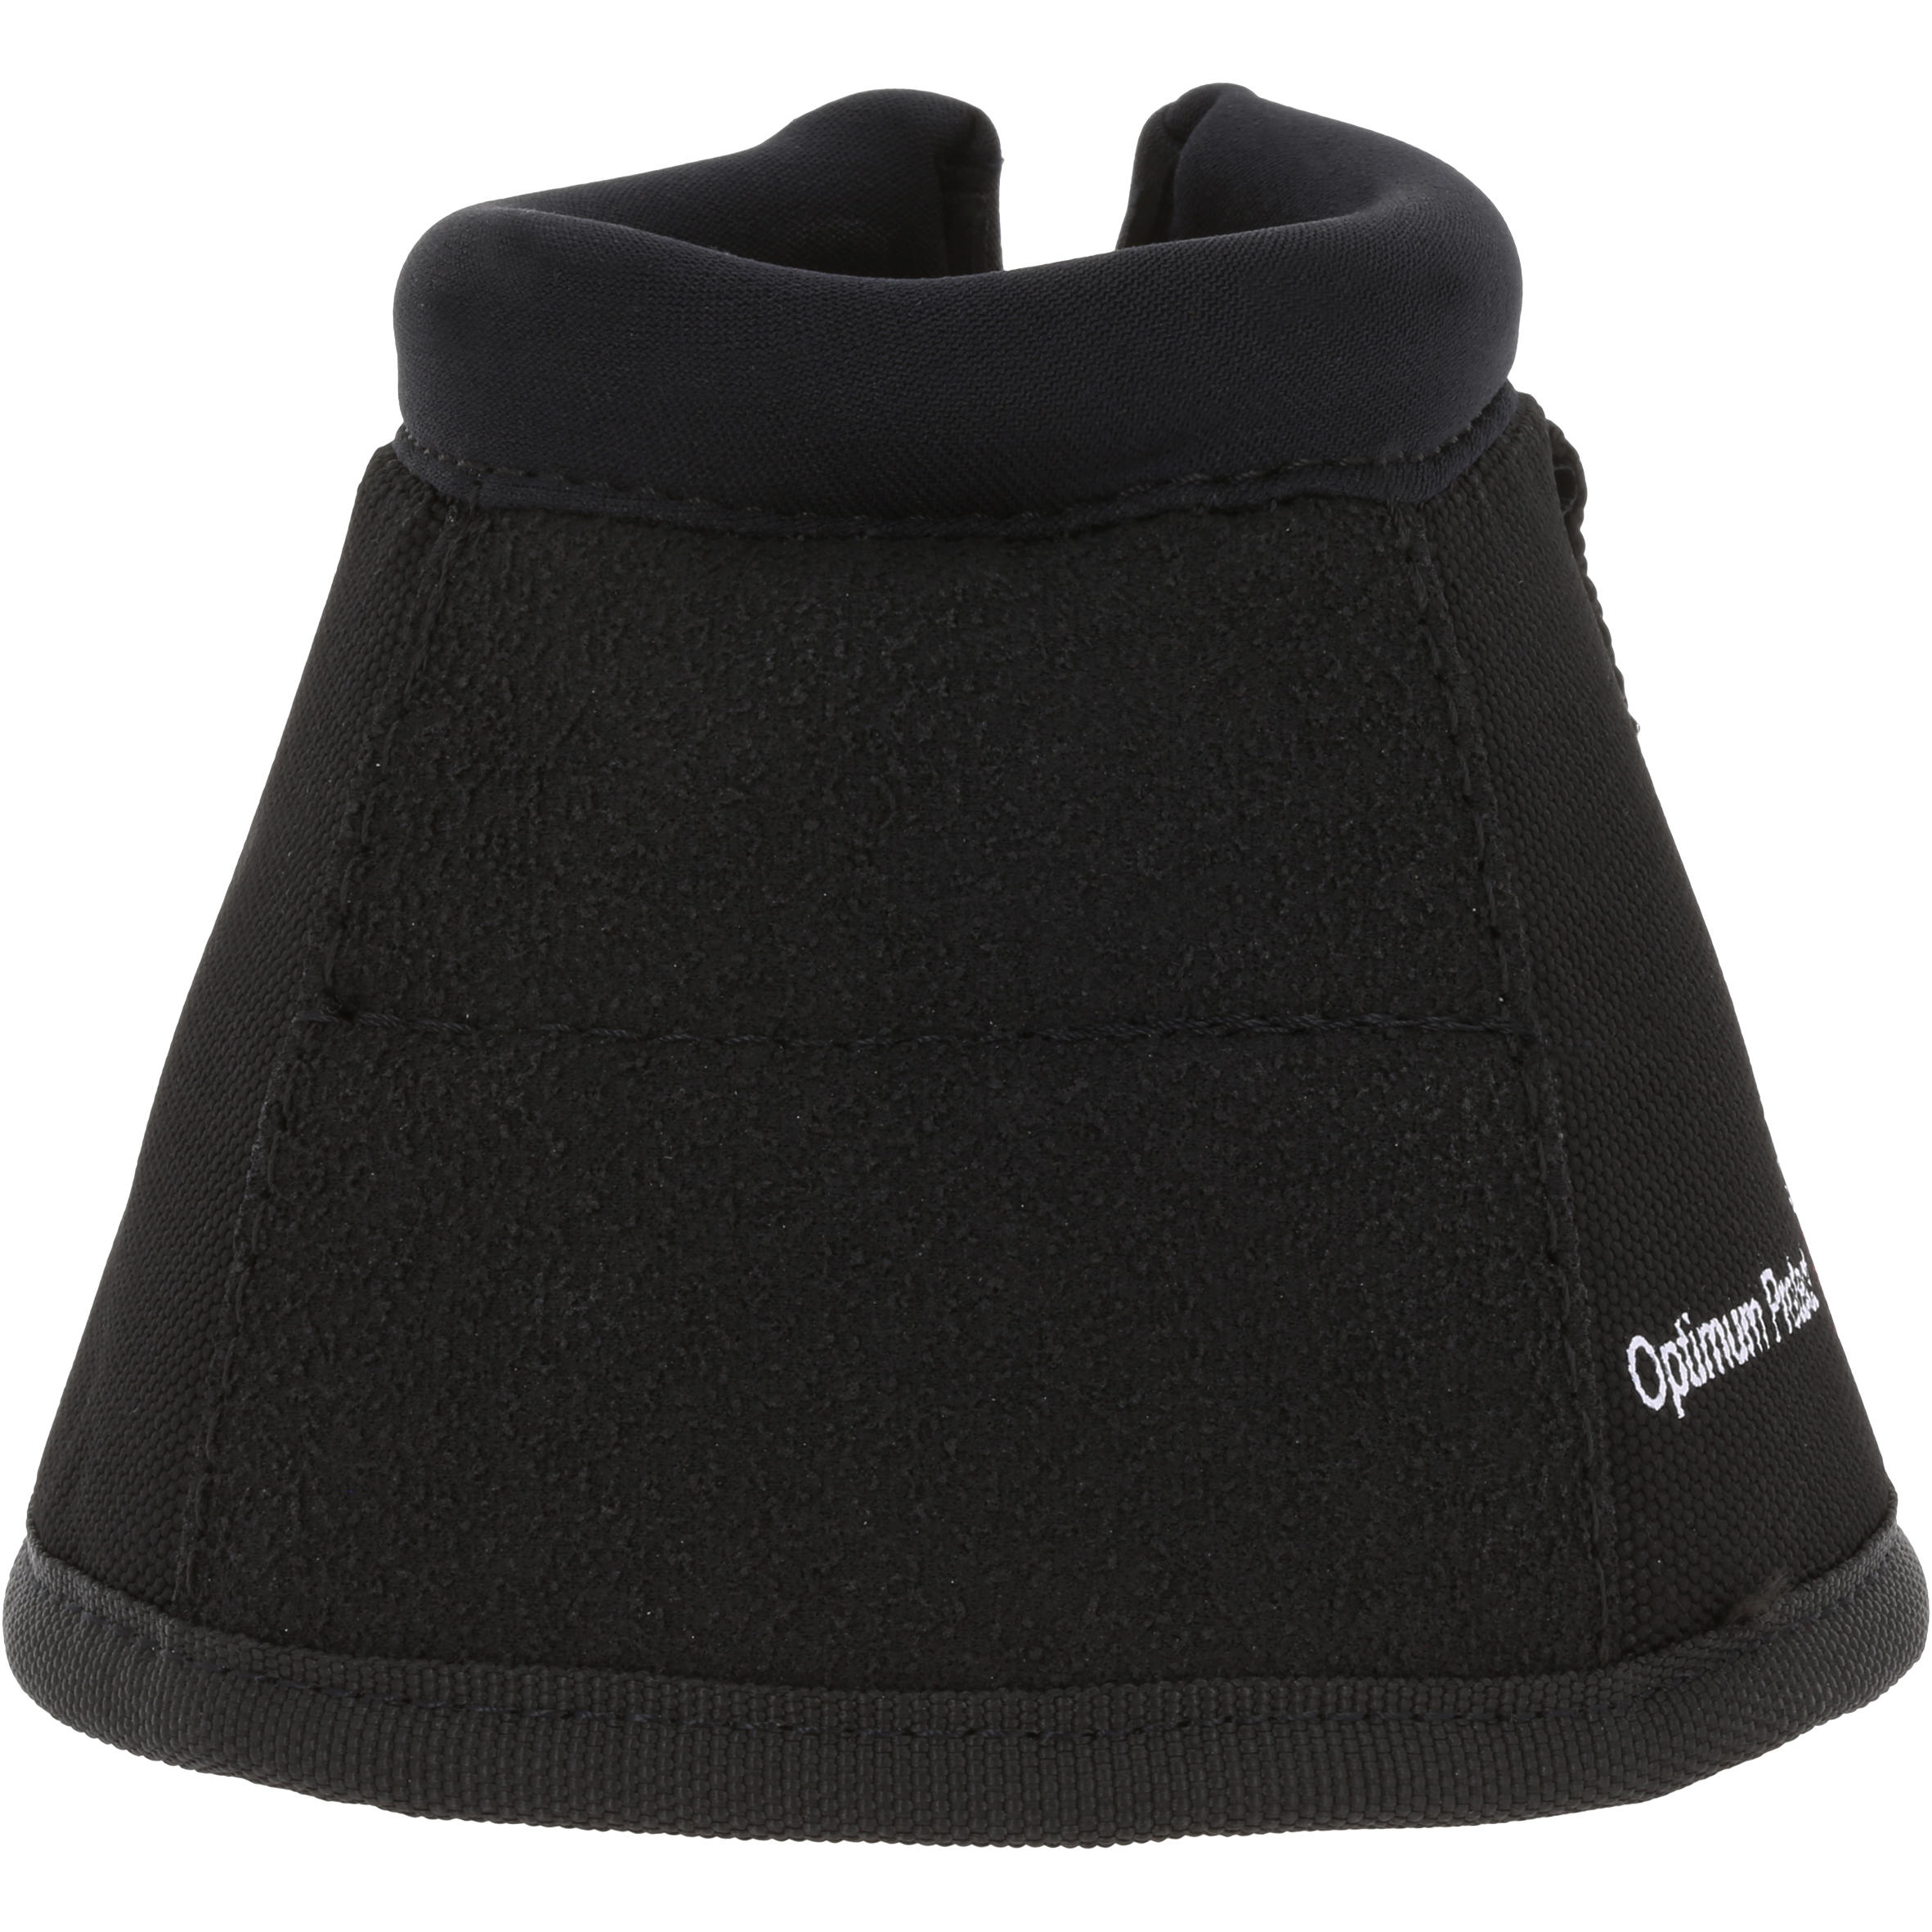 Optimum Horse Riding Open Overreach Boots For Horse And Pony Twin-Pack - Black 2/7